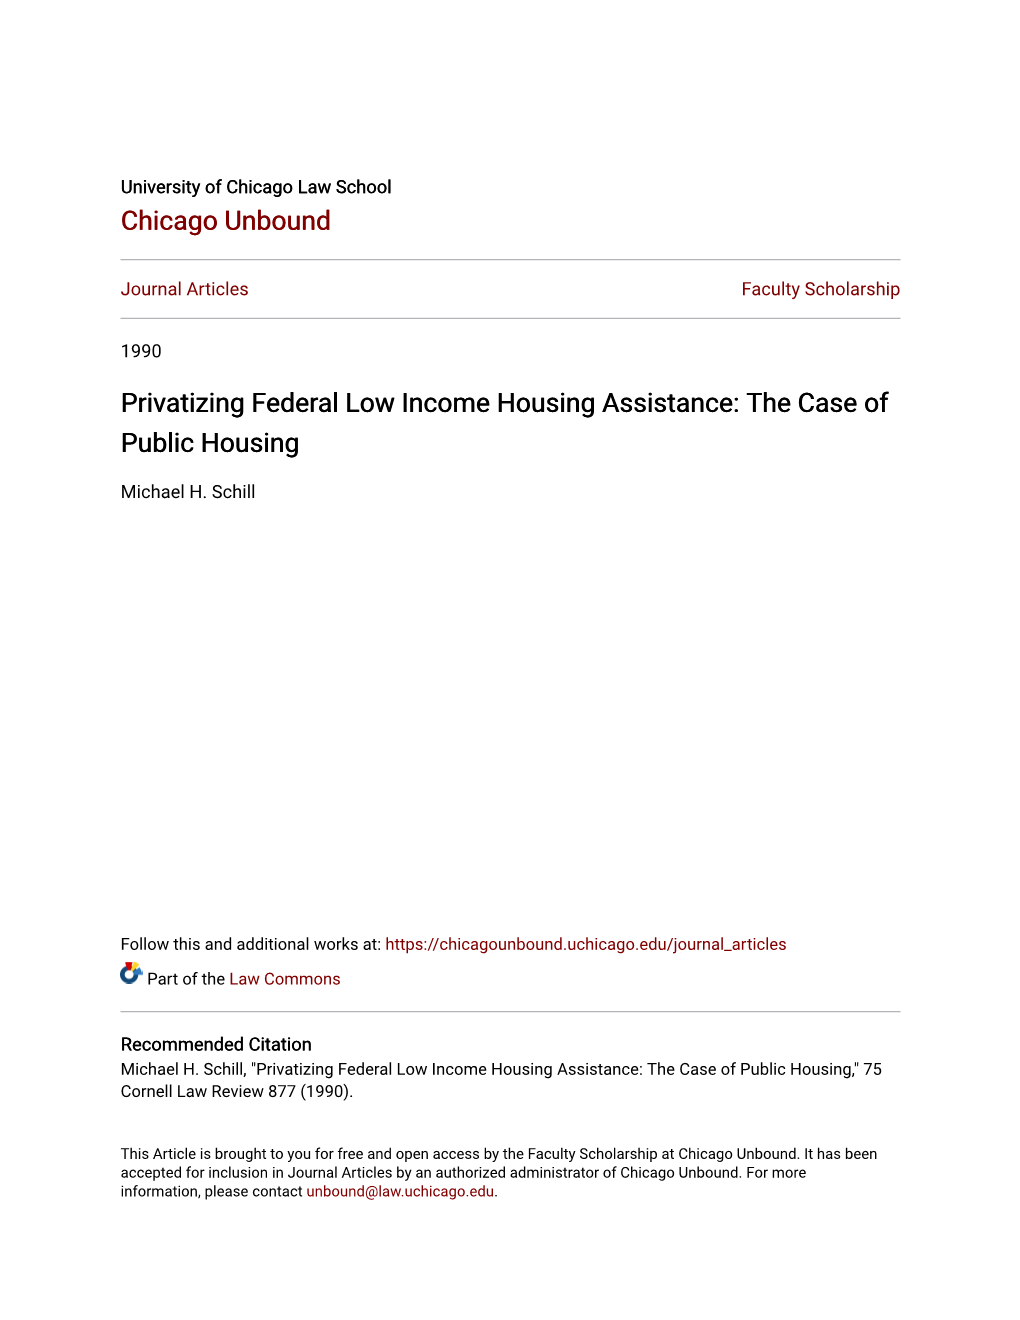 Privatizing Federal Low Income Housing Assistance: the Case of Public Housing